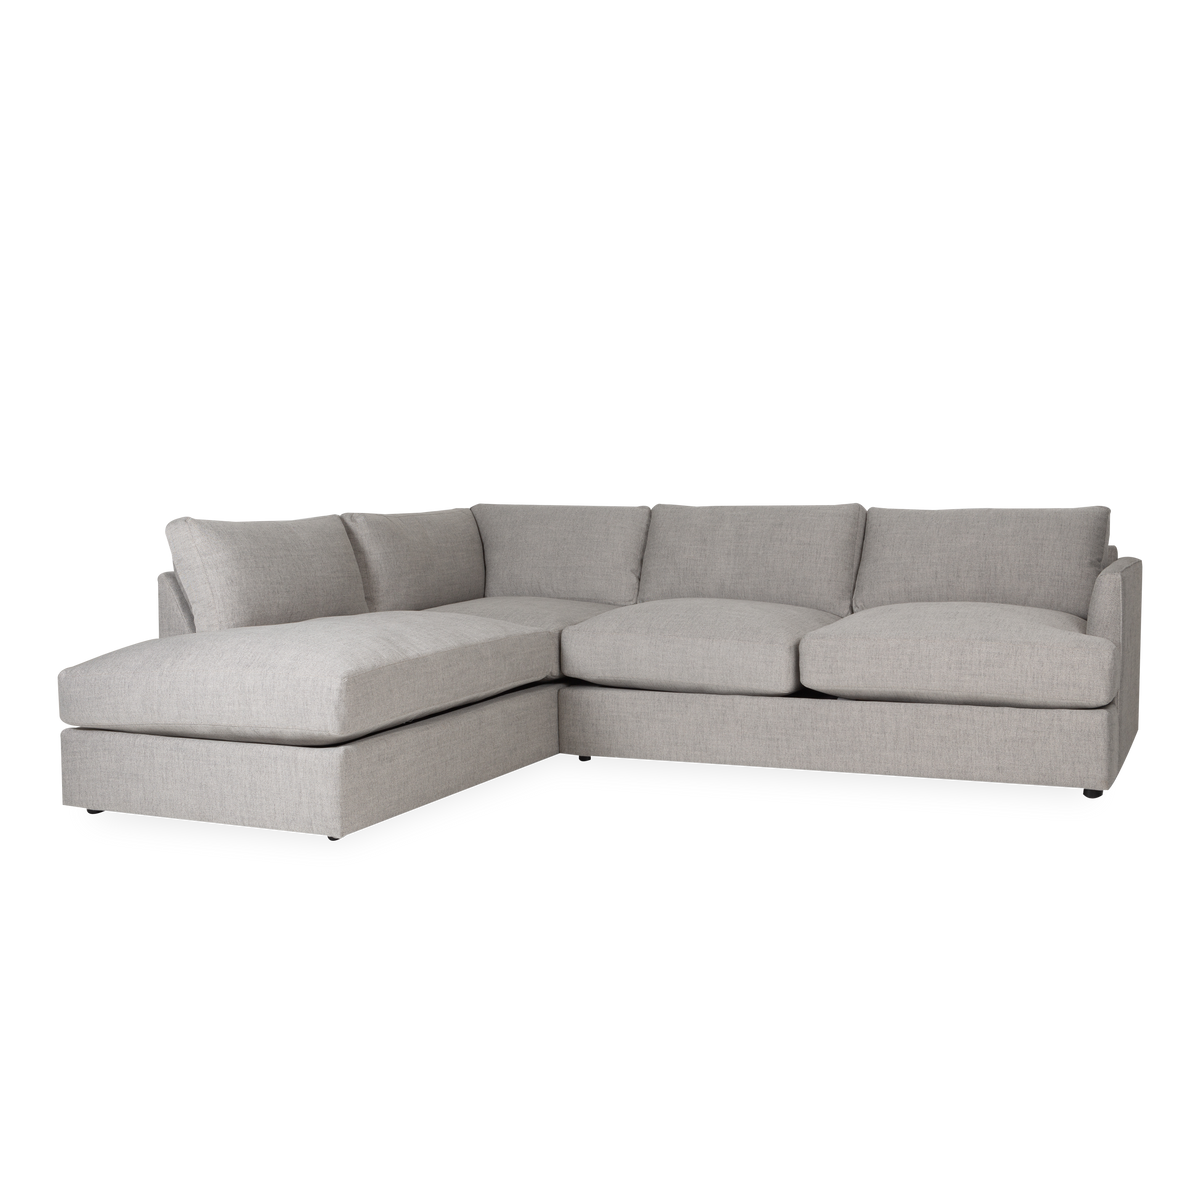 With its large cushioning, the Stockton Sectional invites you in for a moment of rest.